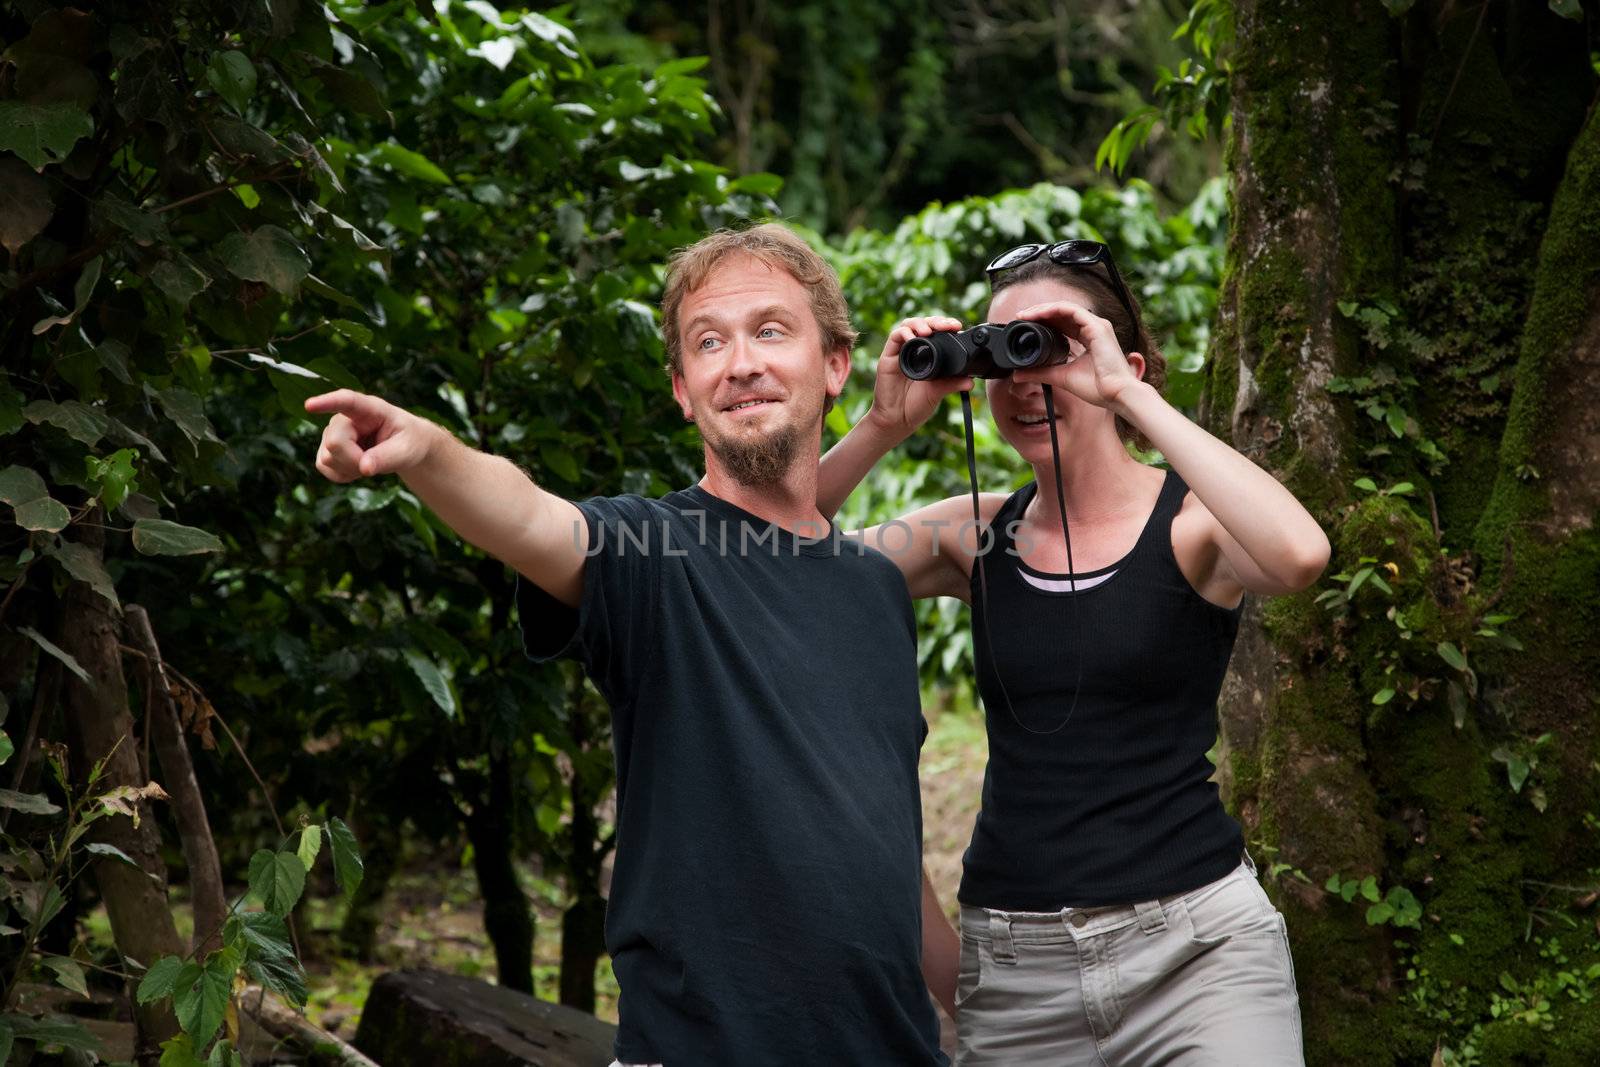 American and European Tourists Exploring Costa Rica